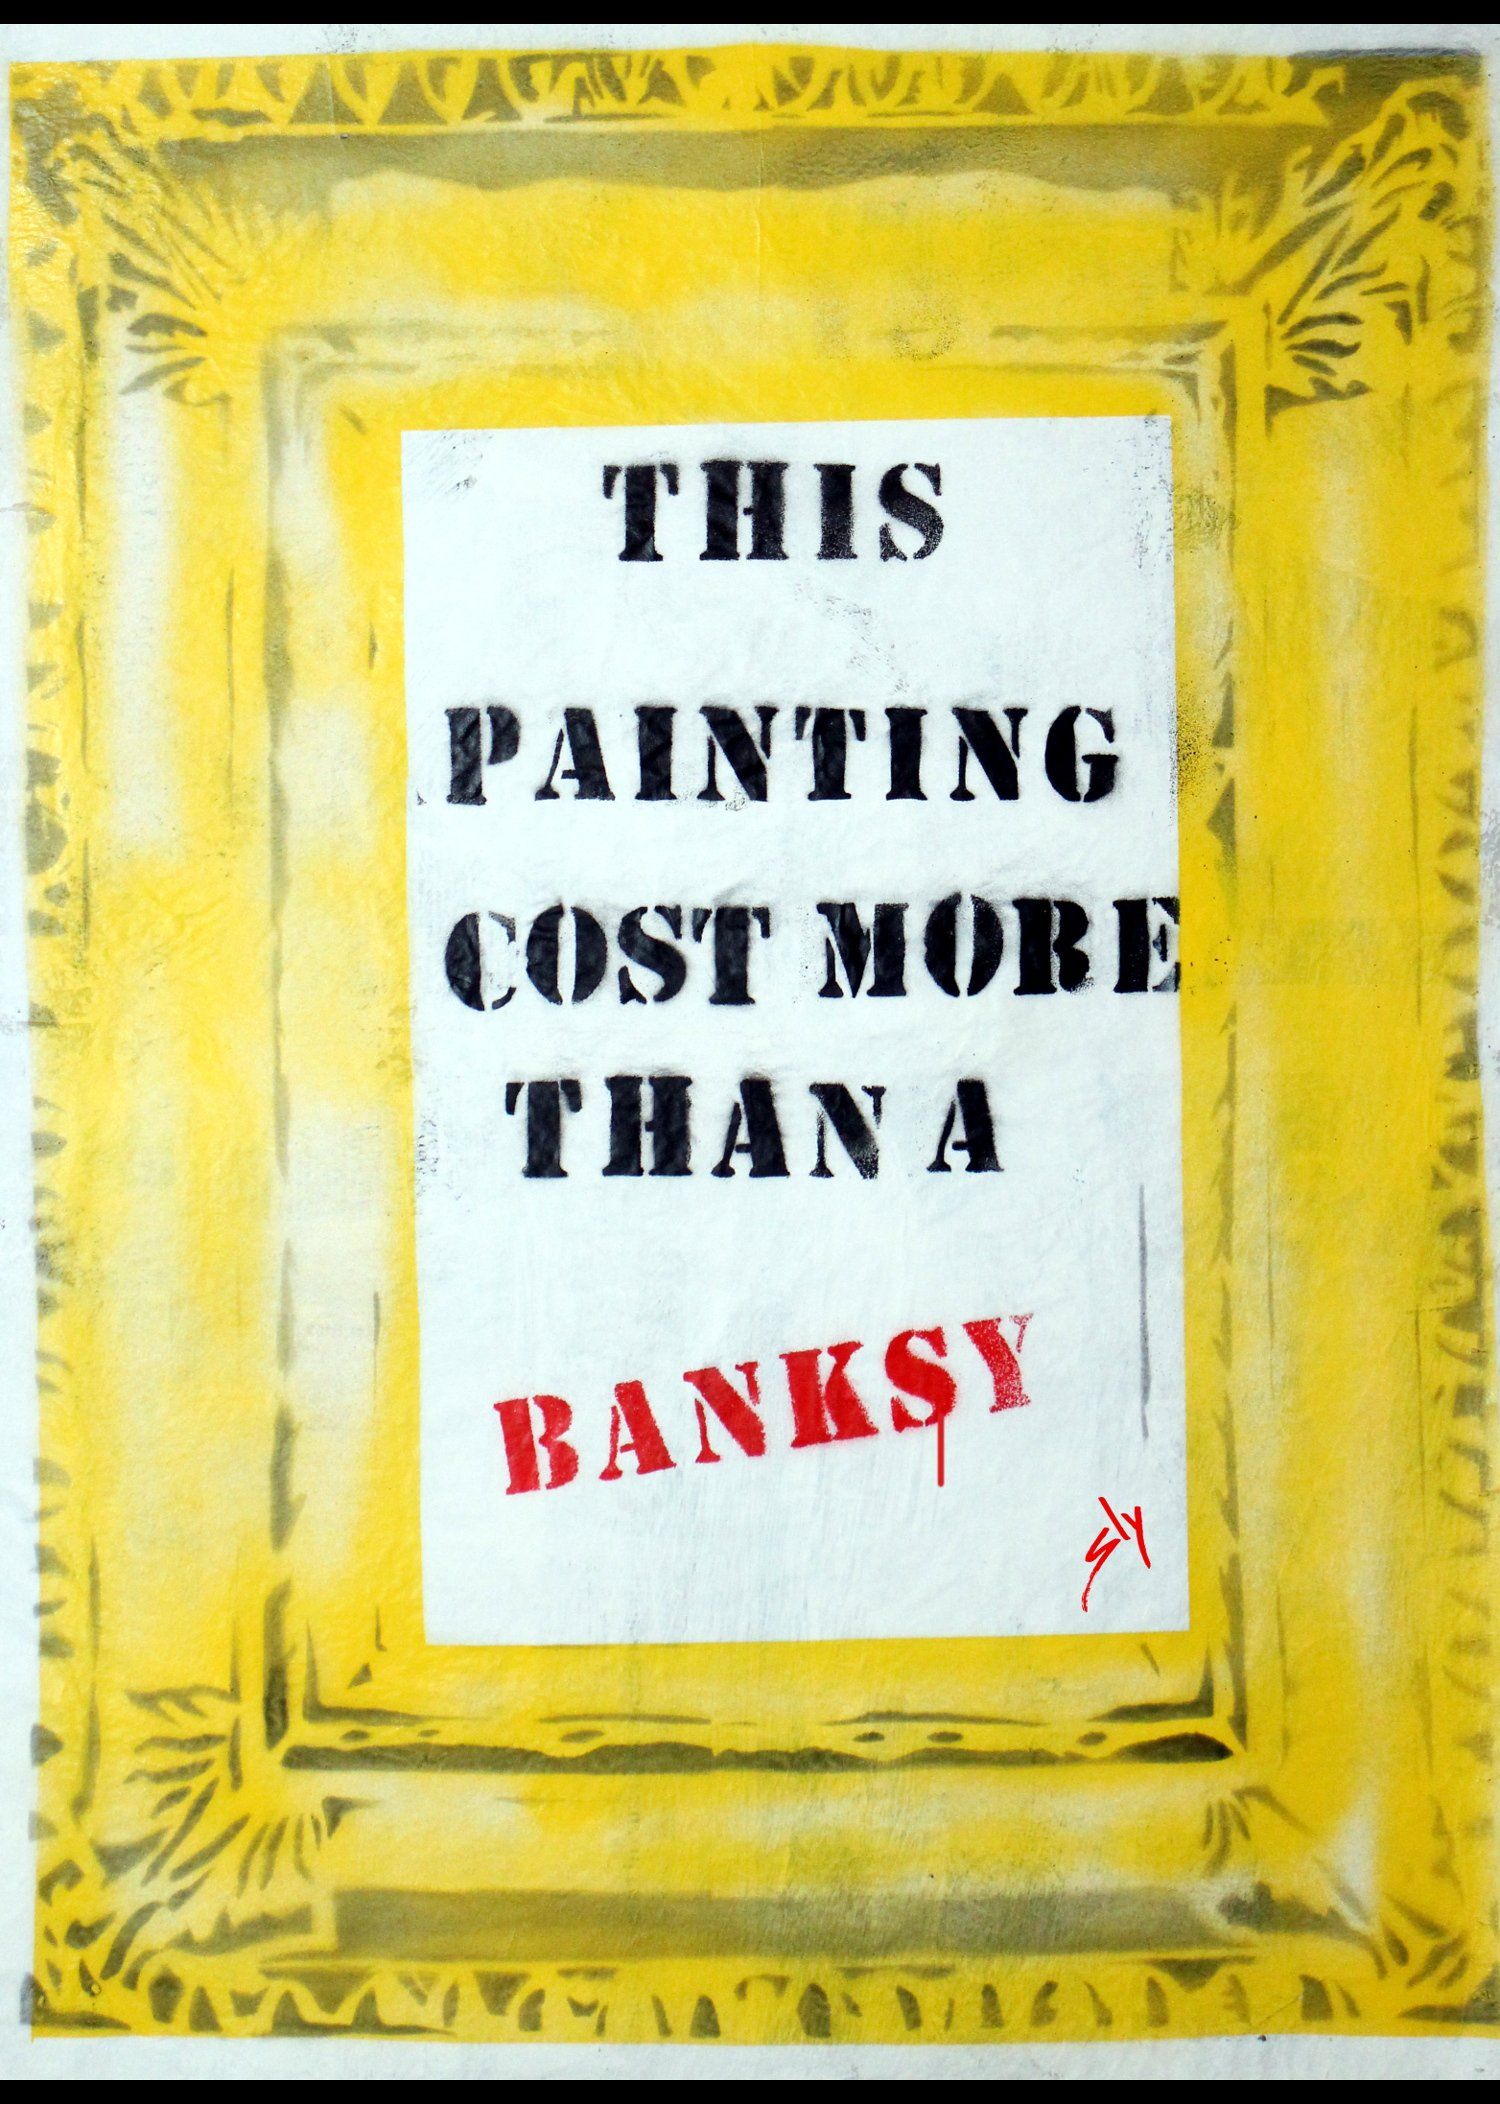 Urban Pop art by Sly Cost more than a Banksy